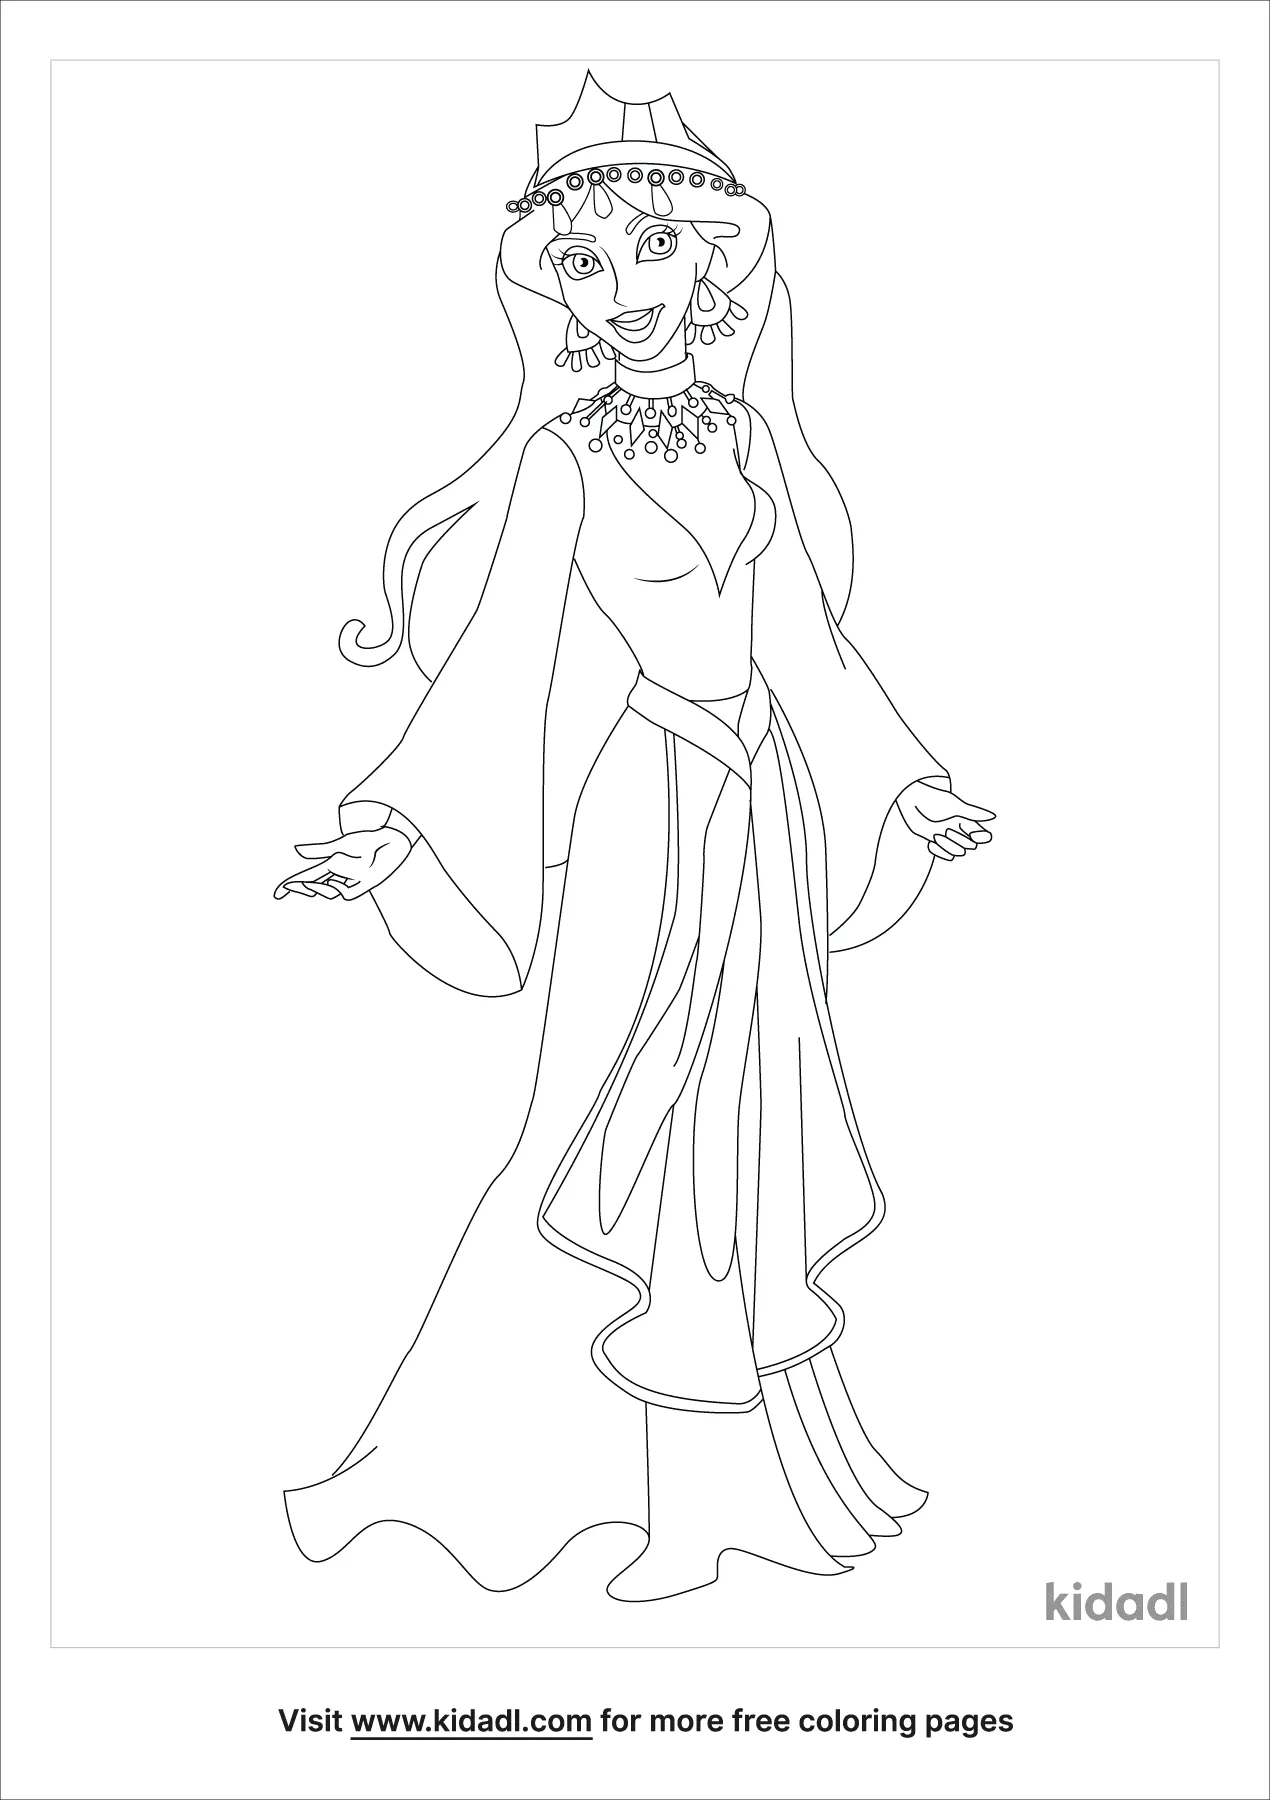 queen esther coloring pages